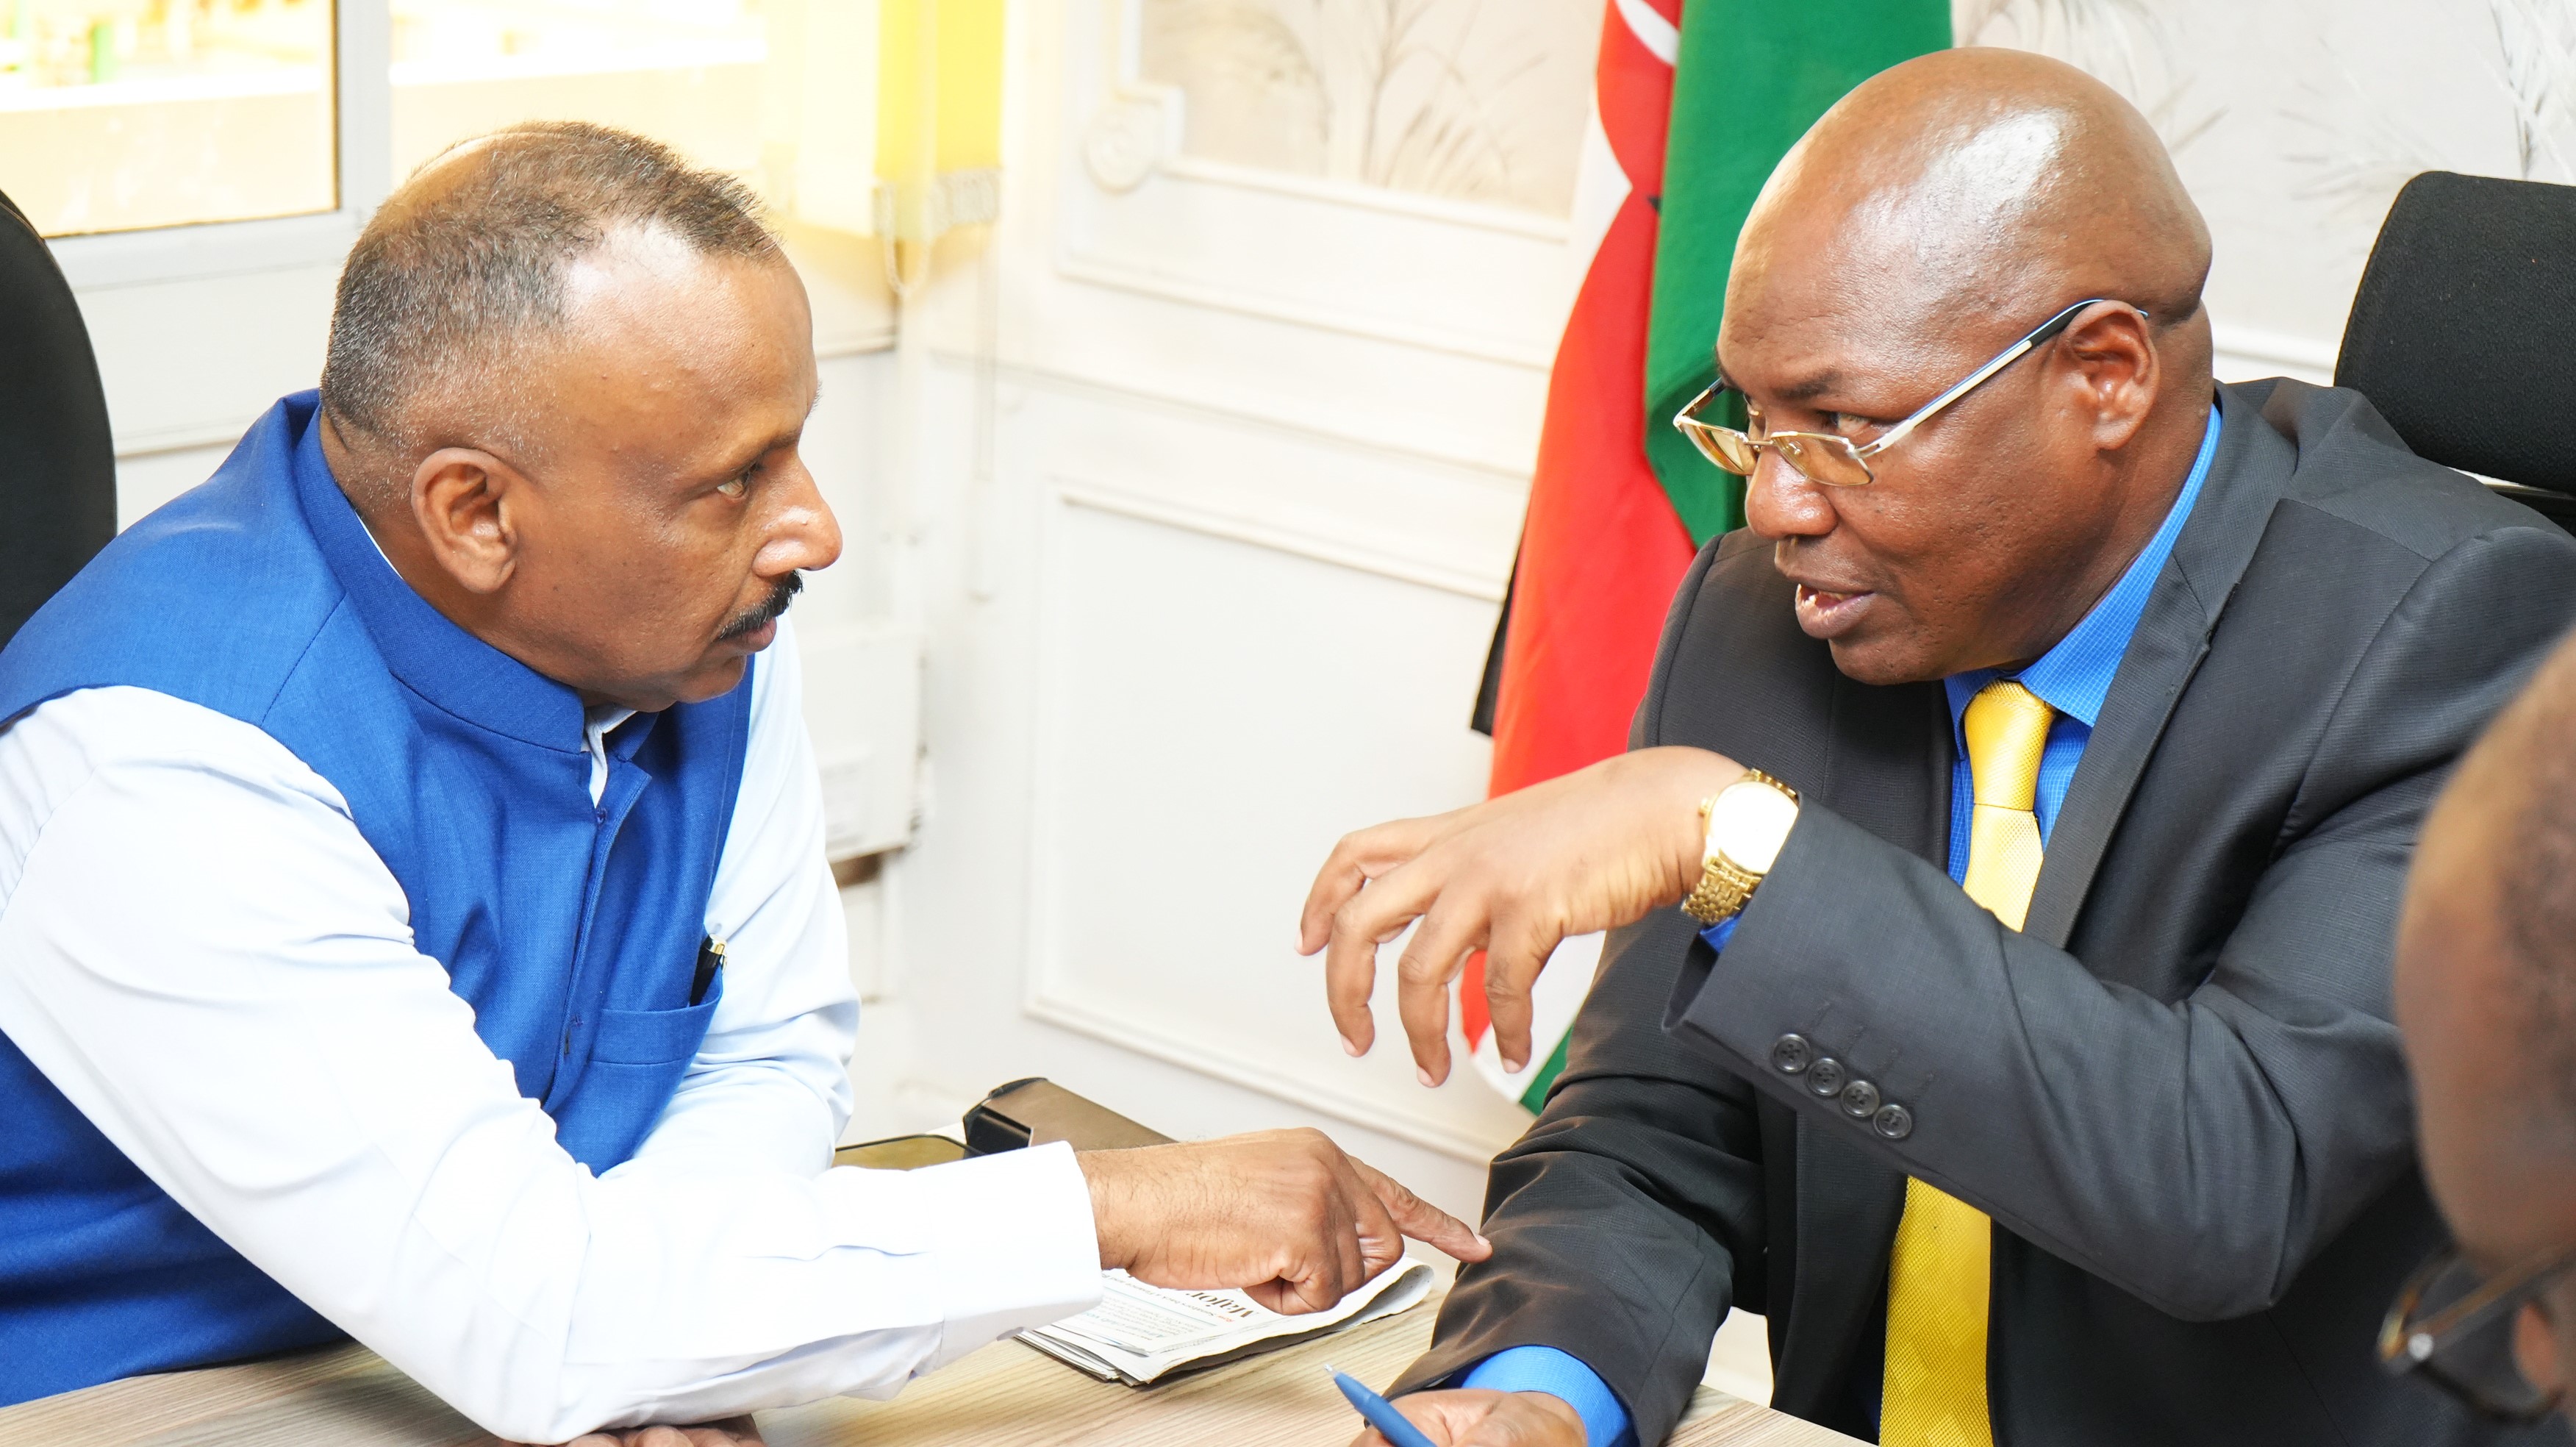 Kenya and Sri Lanka Explore Healthcare Investment Opportunities in High-Level Meeting